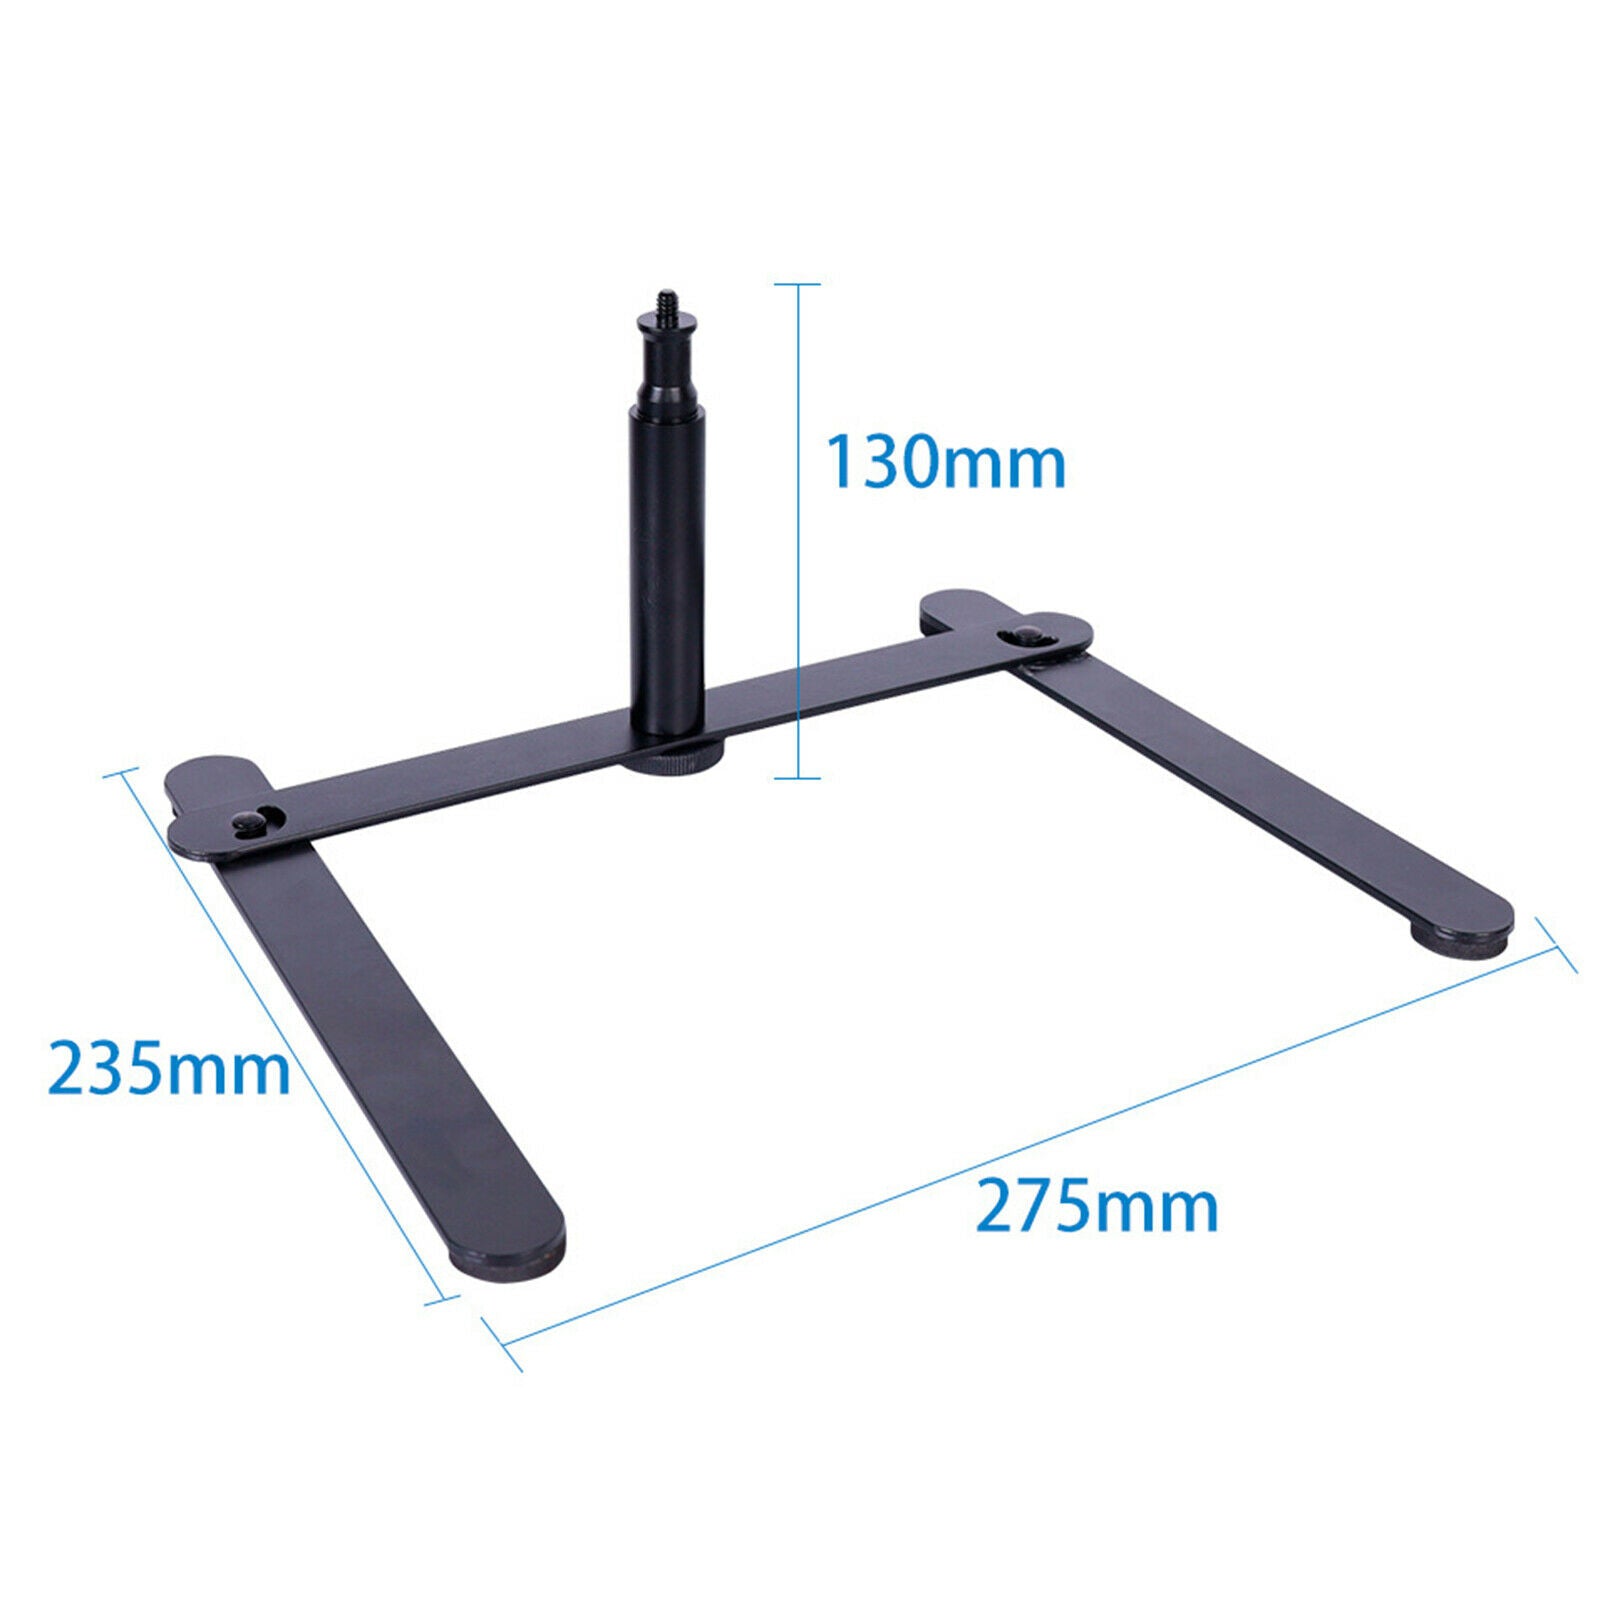 Foldable Alloy Loop Light Stand Base Supplies for Video Shooting Live Show